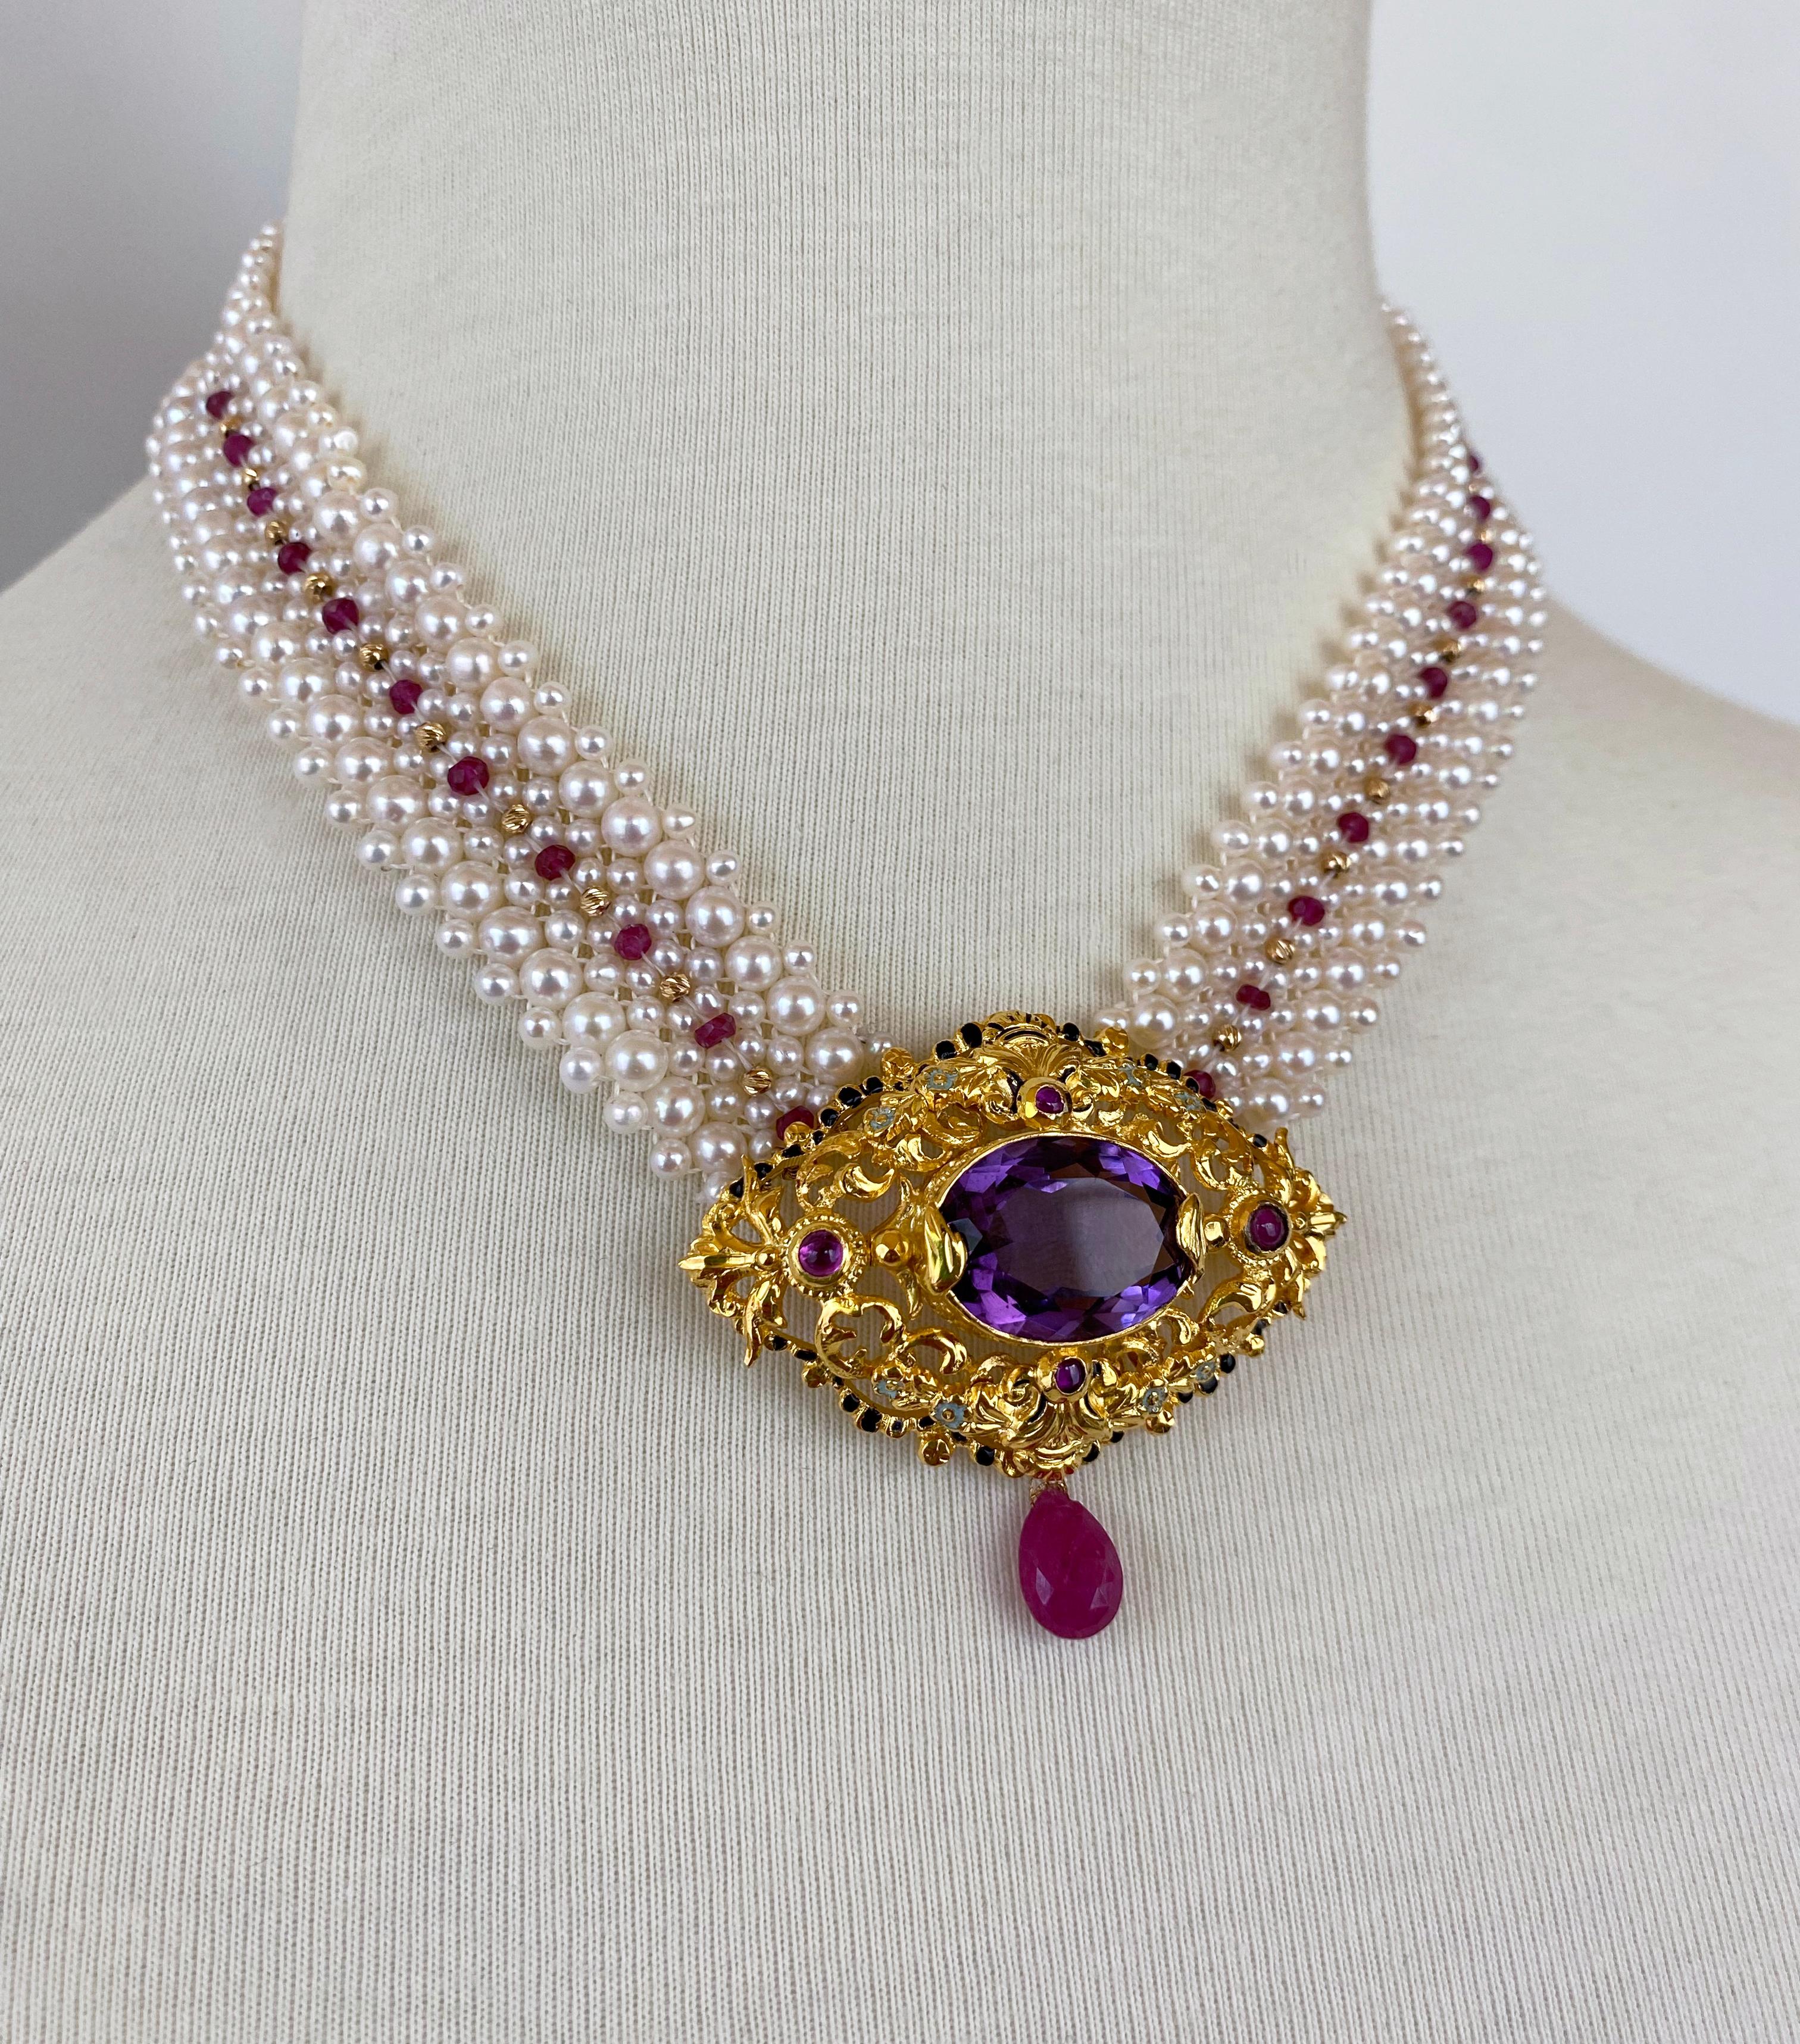 Victorian Marina J. Woven Pearl, Ruby & Gold Necklace with Vintage Gold & Amethyst Brooch